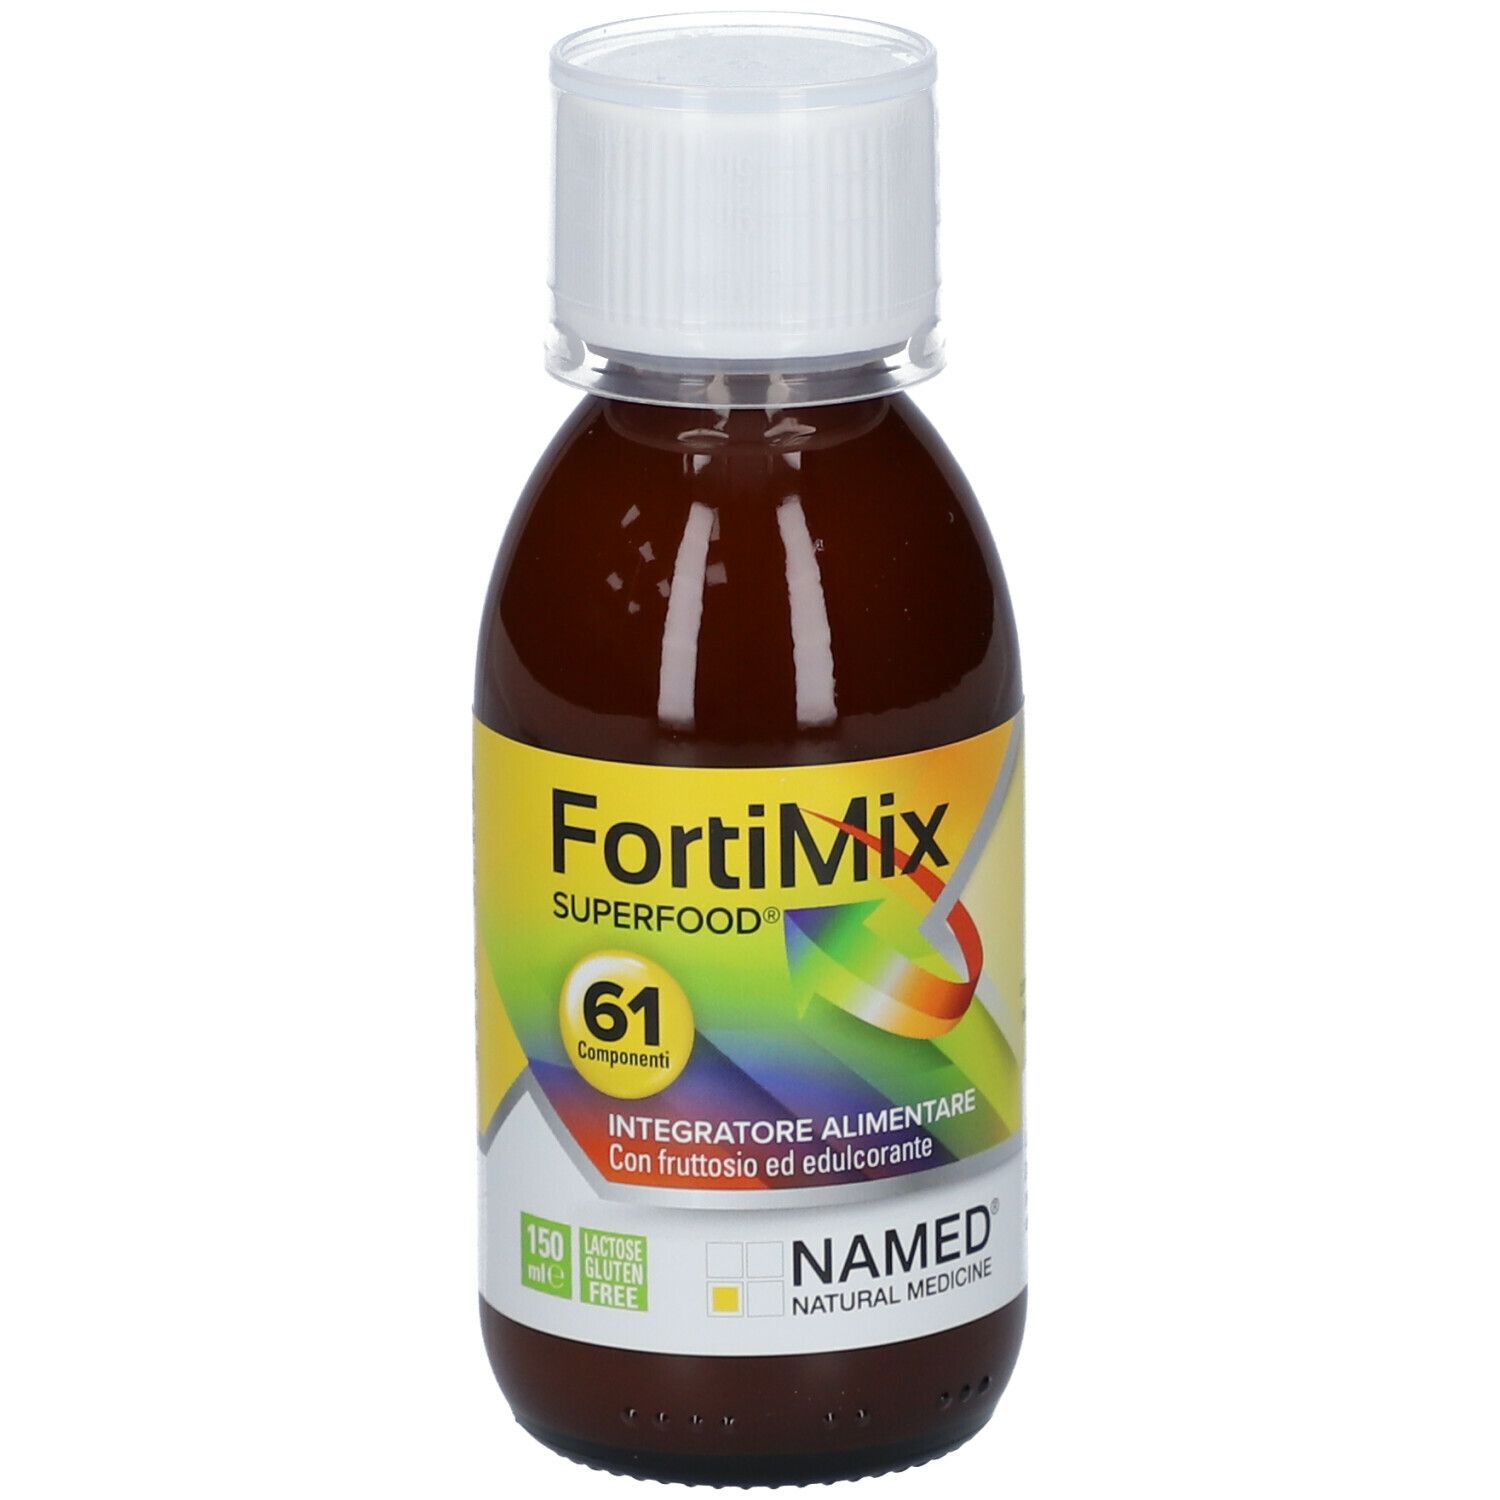 NAMED® FortiMix Superfood®